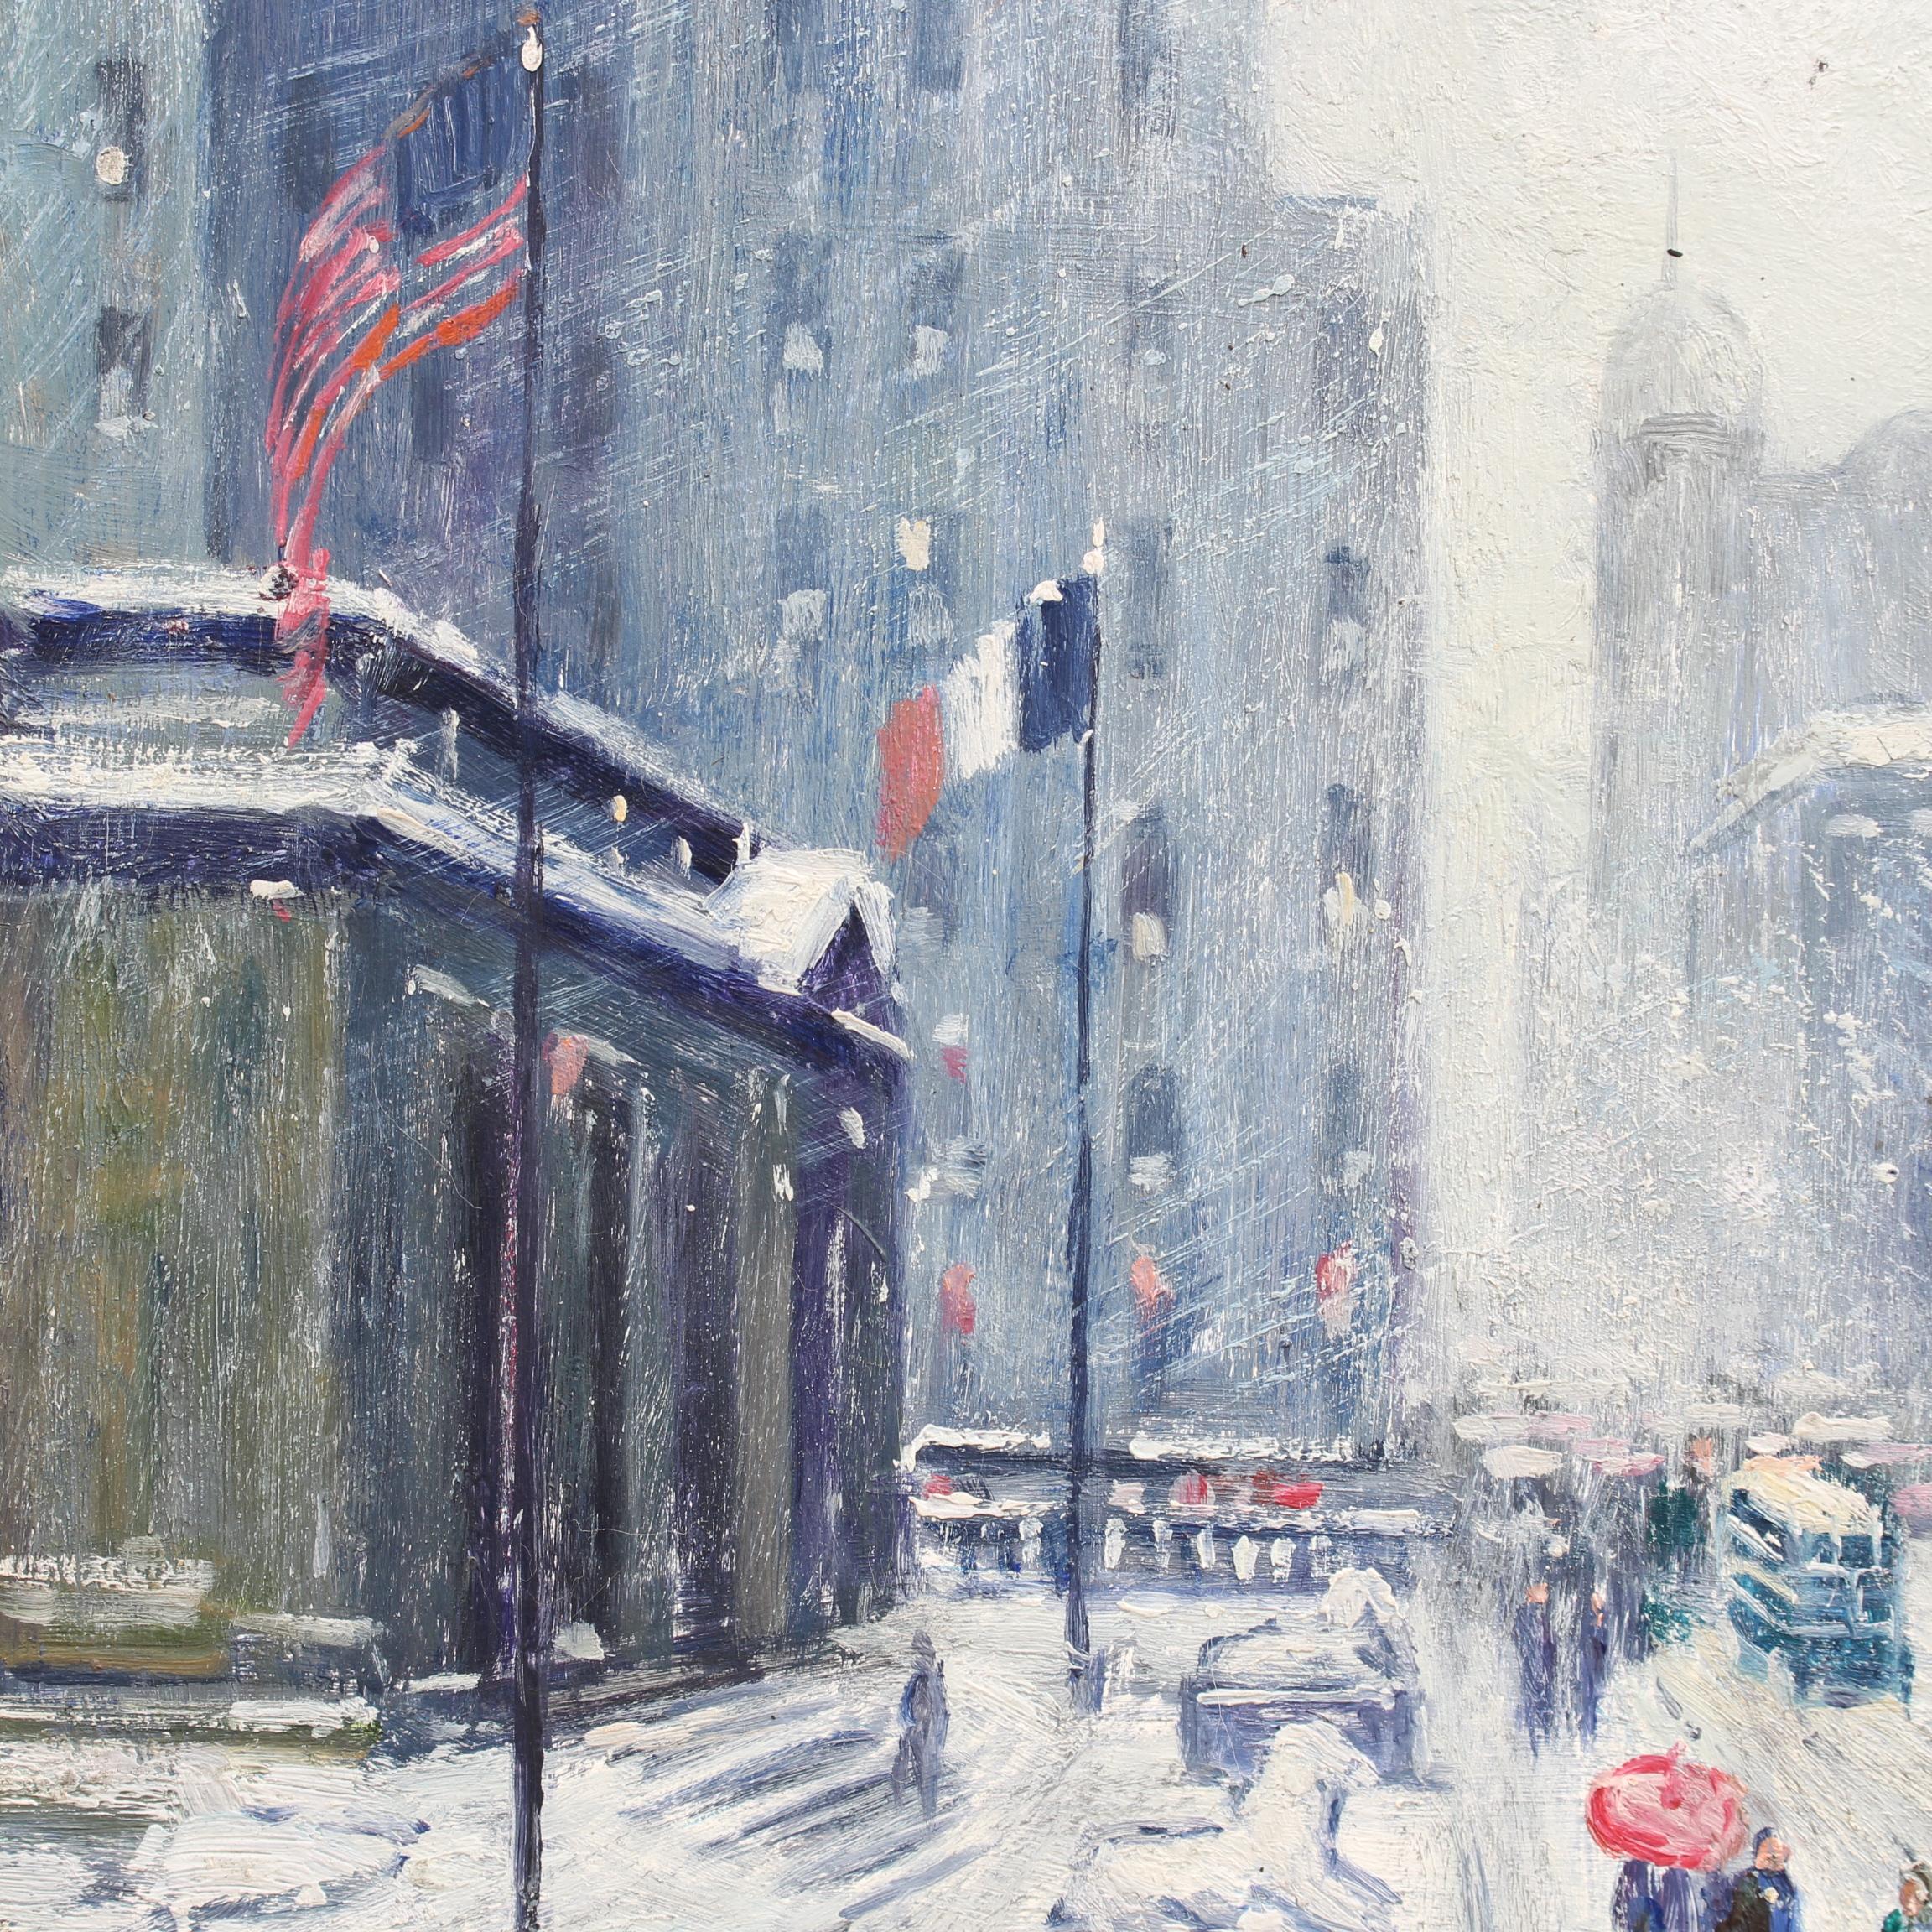 'New York Public Library Under Snow 1940s' by Finley 2